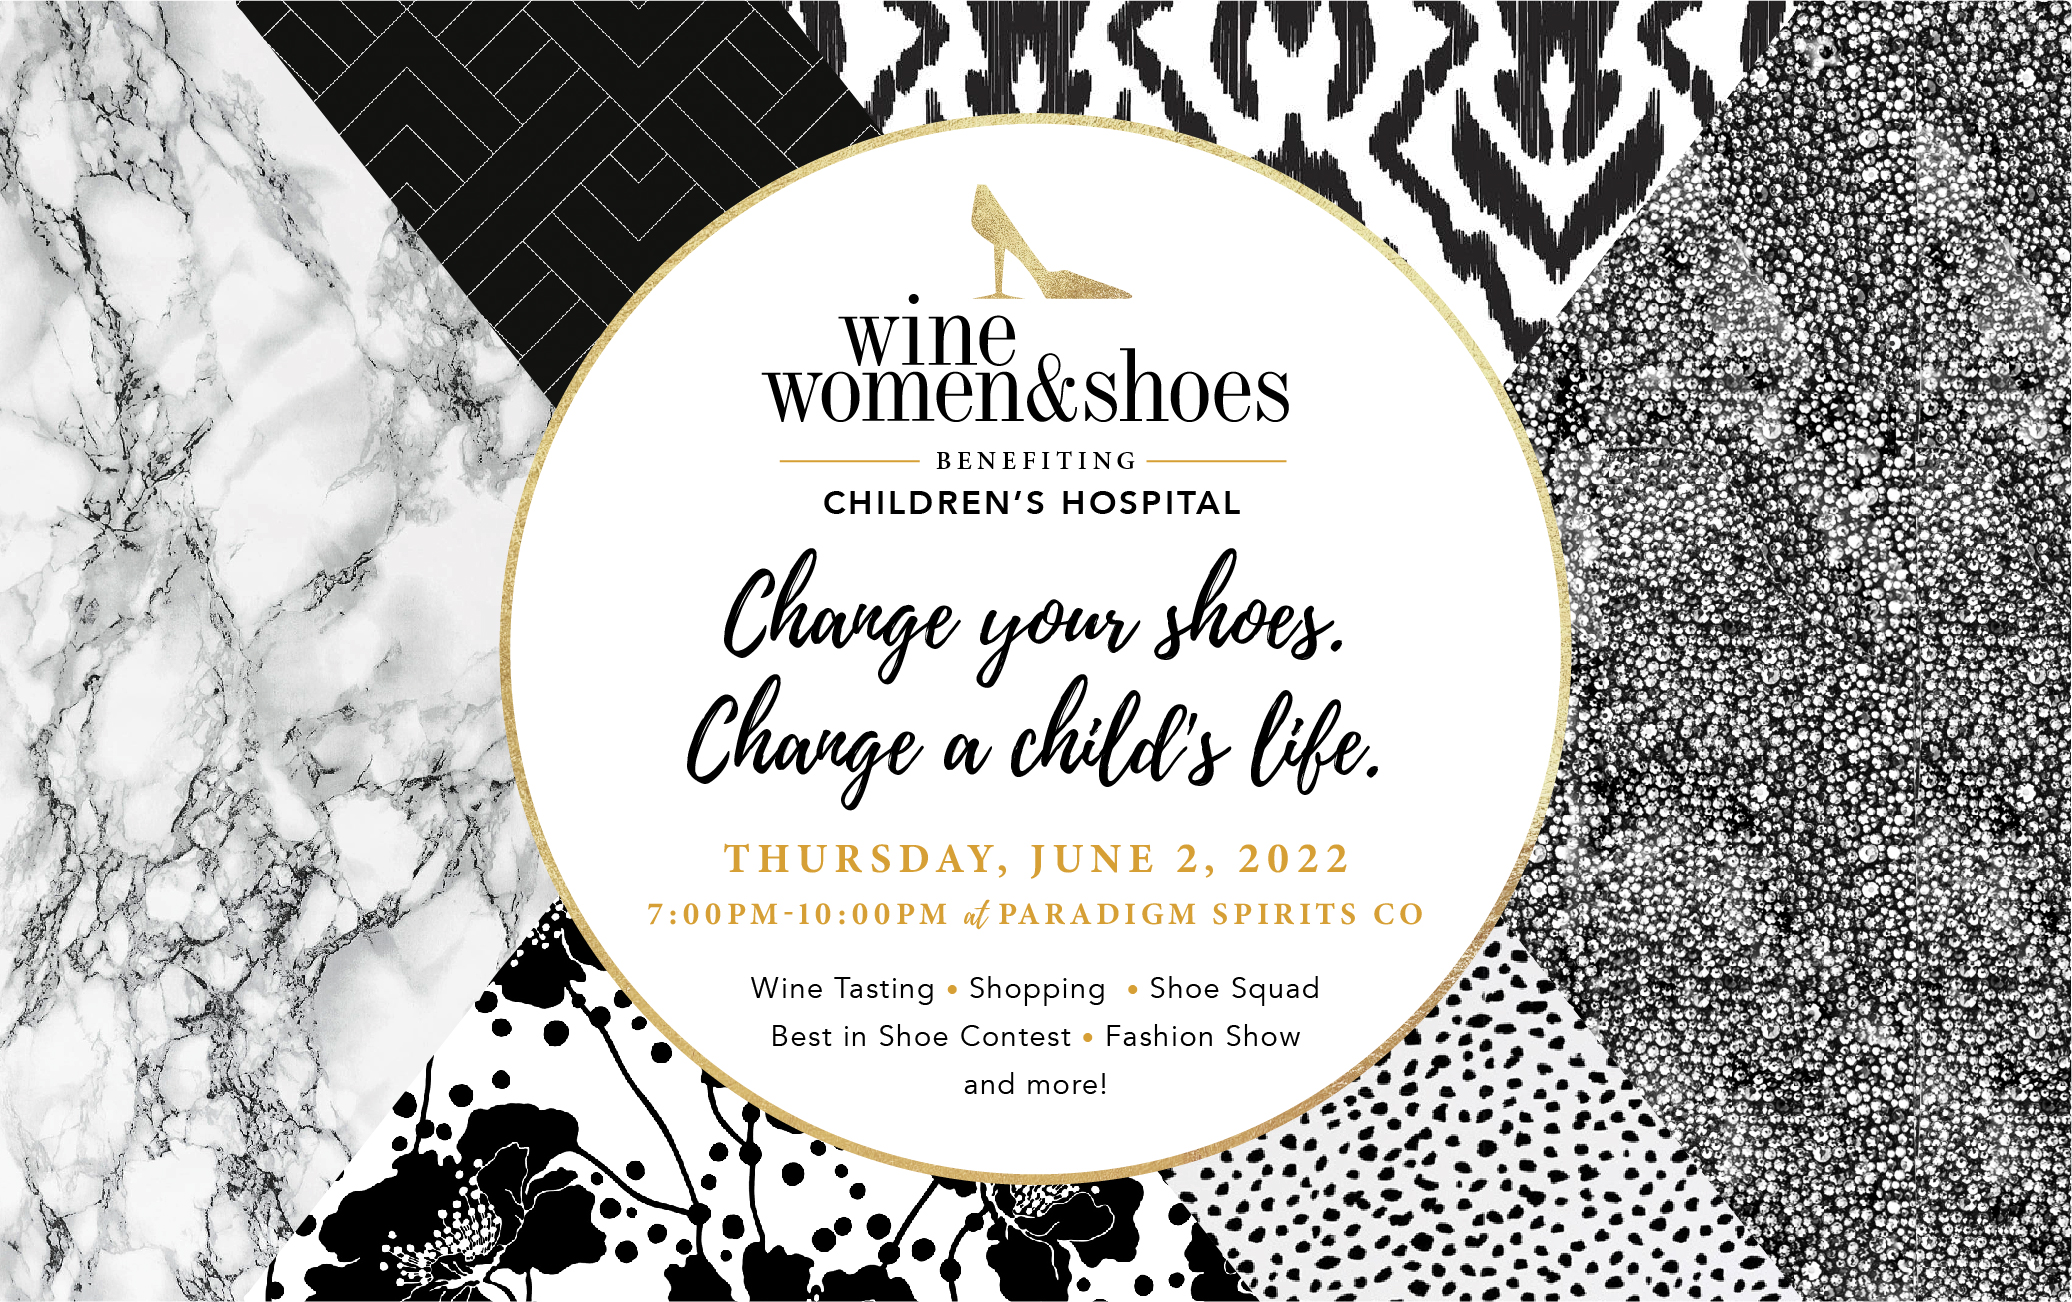 Sip, Shop, and Support Children's Hospital at Wine, Women, and Shoes on June 2, 2022